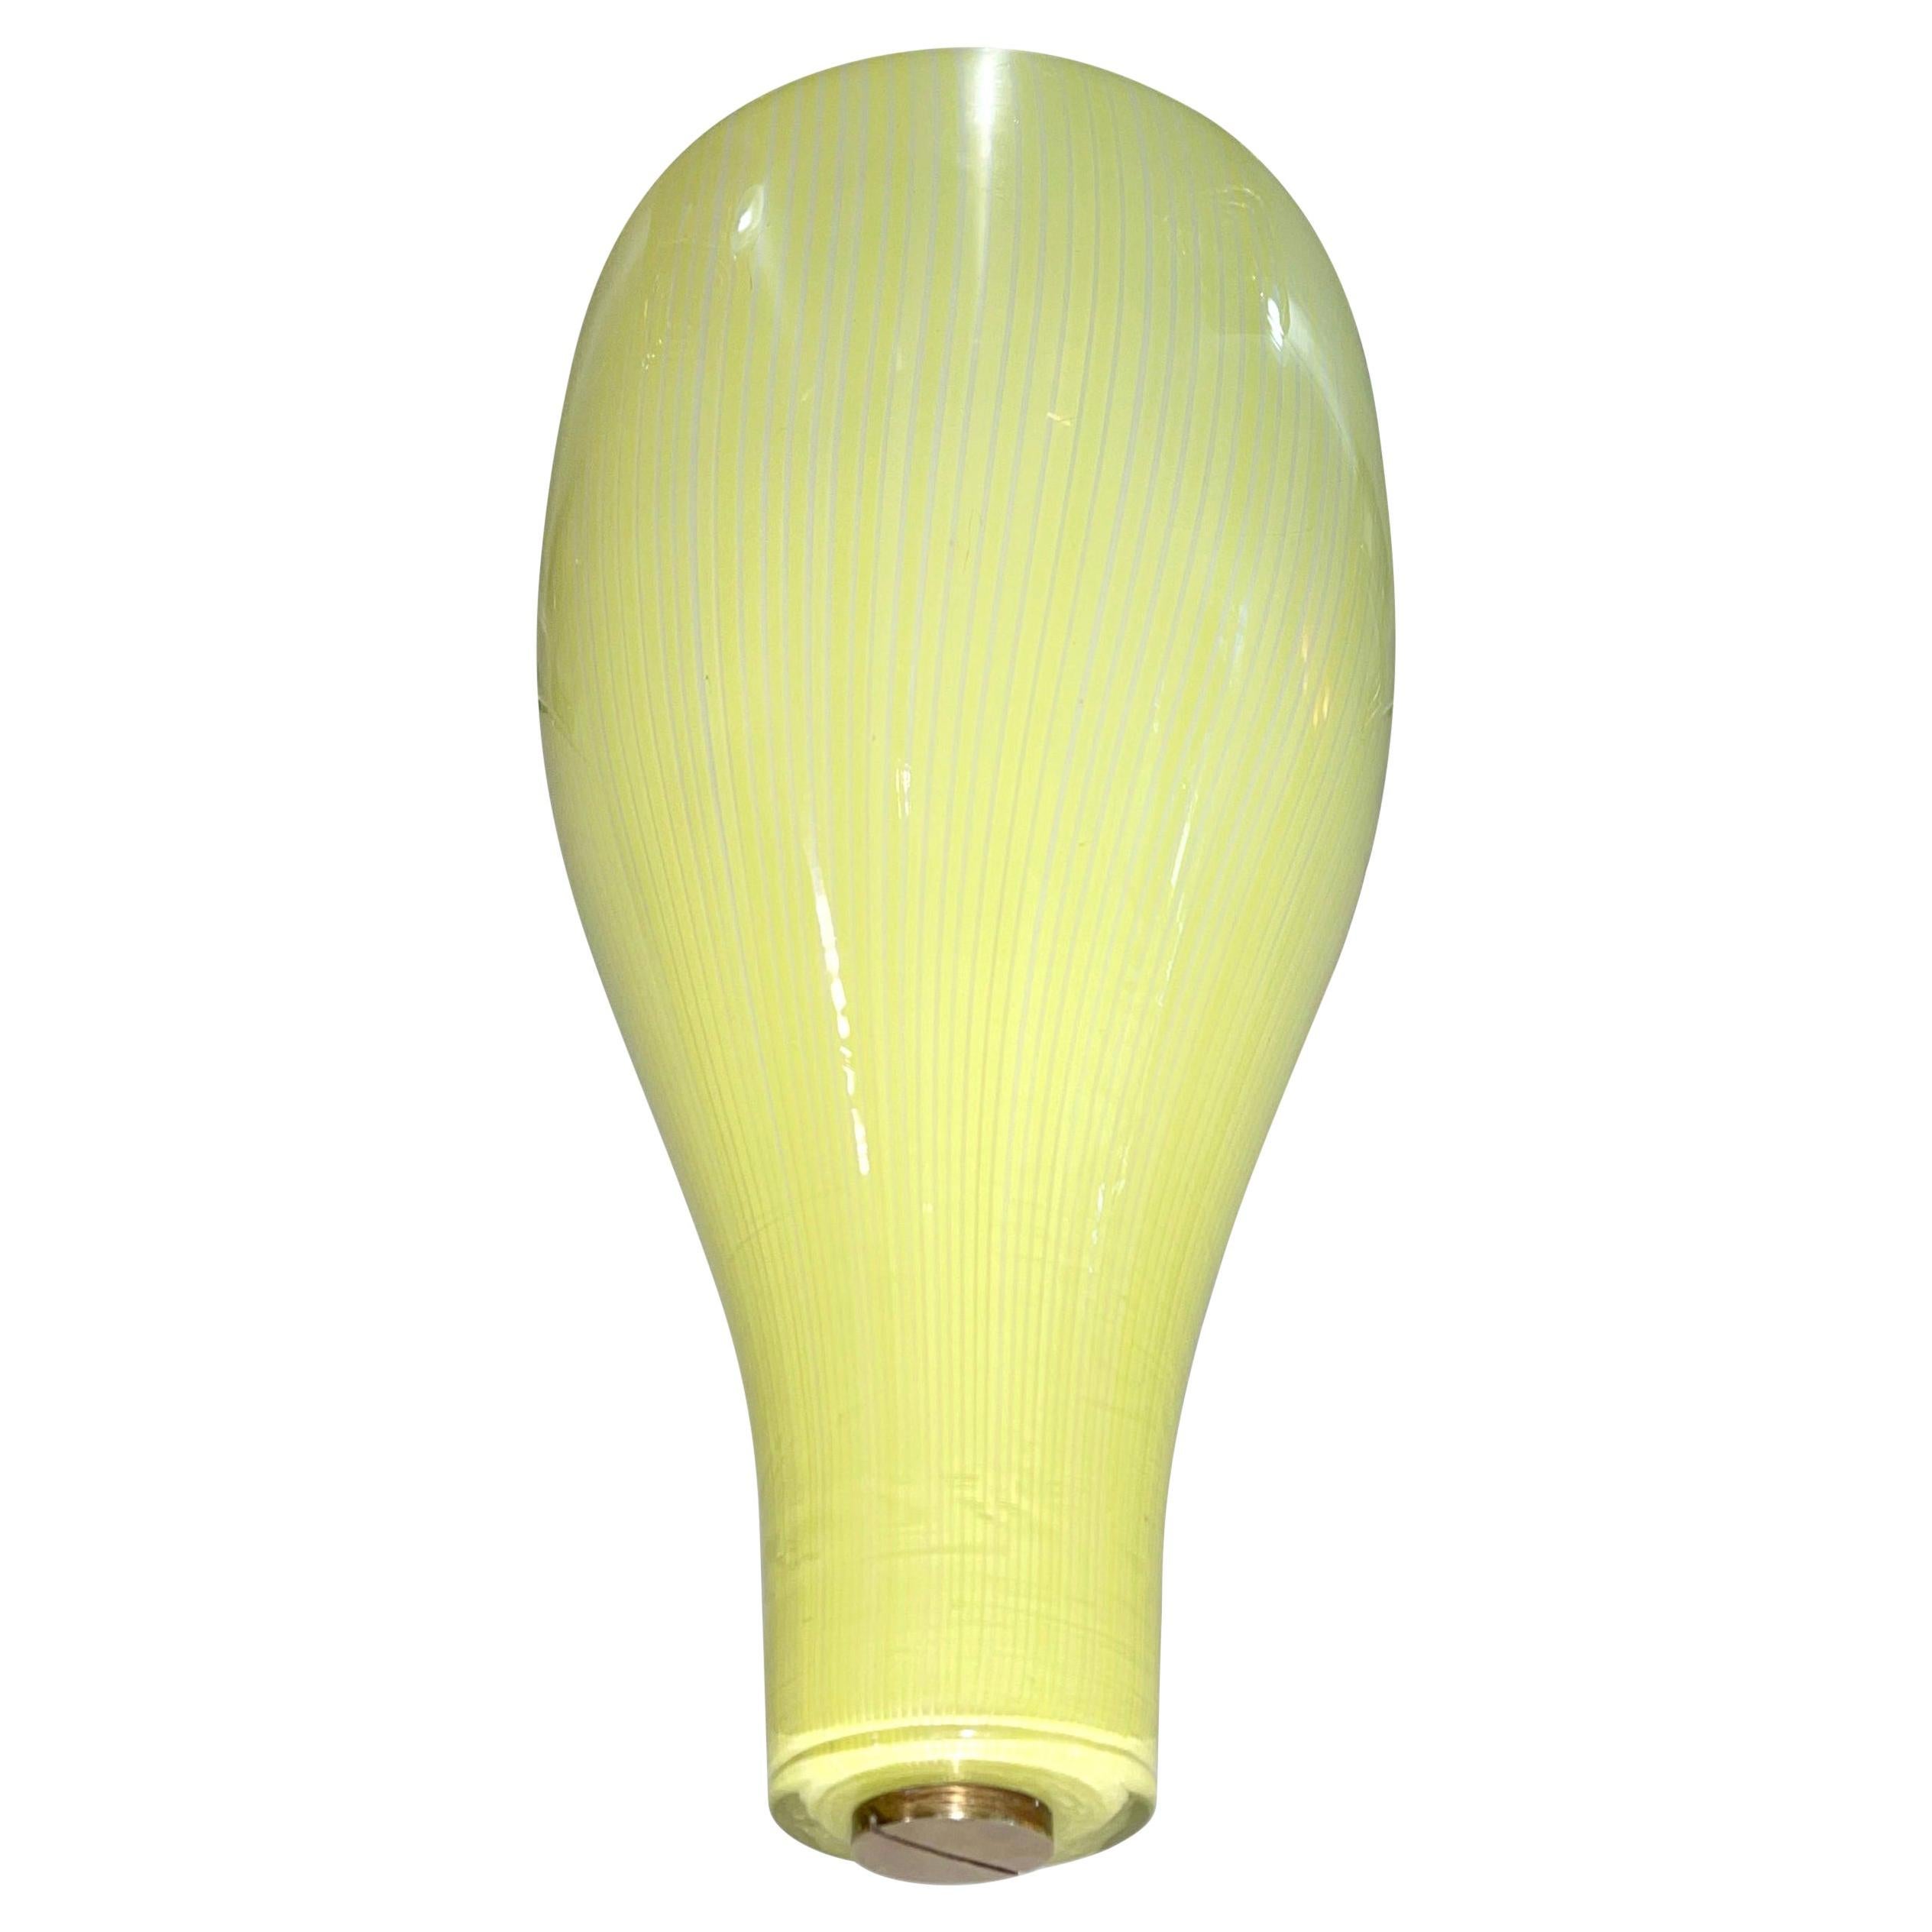 Massimo Vignelli for Venini Yellow Onion Glass Uplighter Wall Sconce For Sale